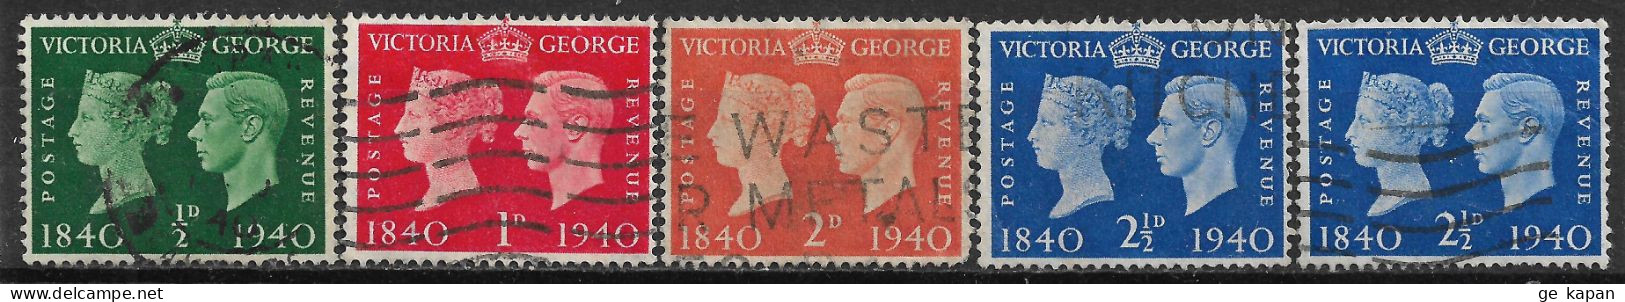 1940 GREAT BRITAIN Set Of 5 Used Stamps (Scott # 252,253,255,256) CV $2.60 - Used Stamps